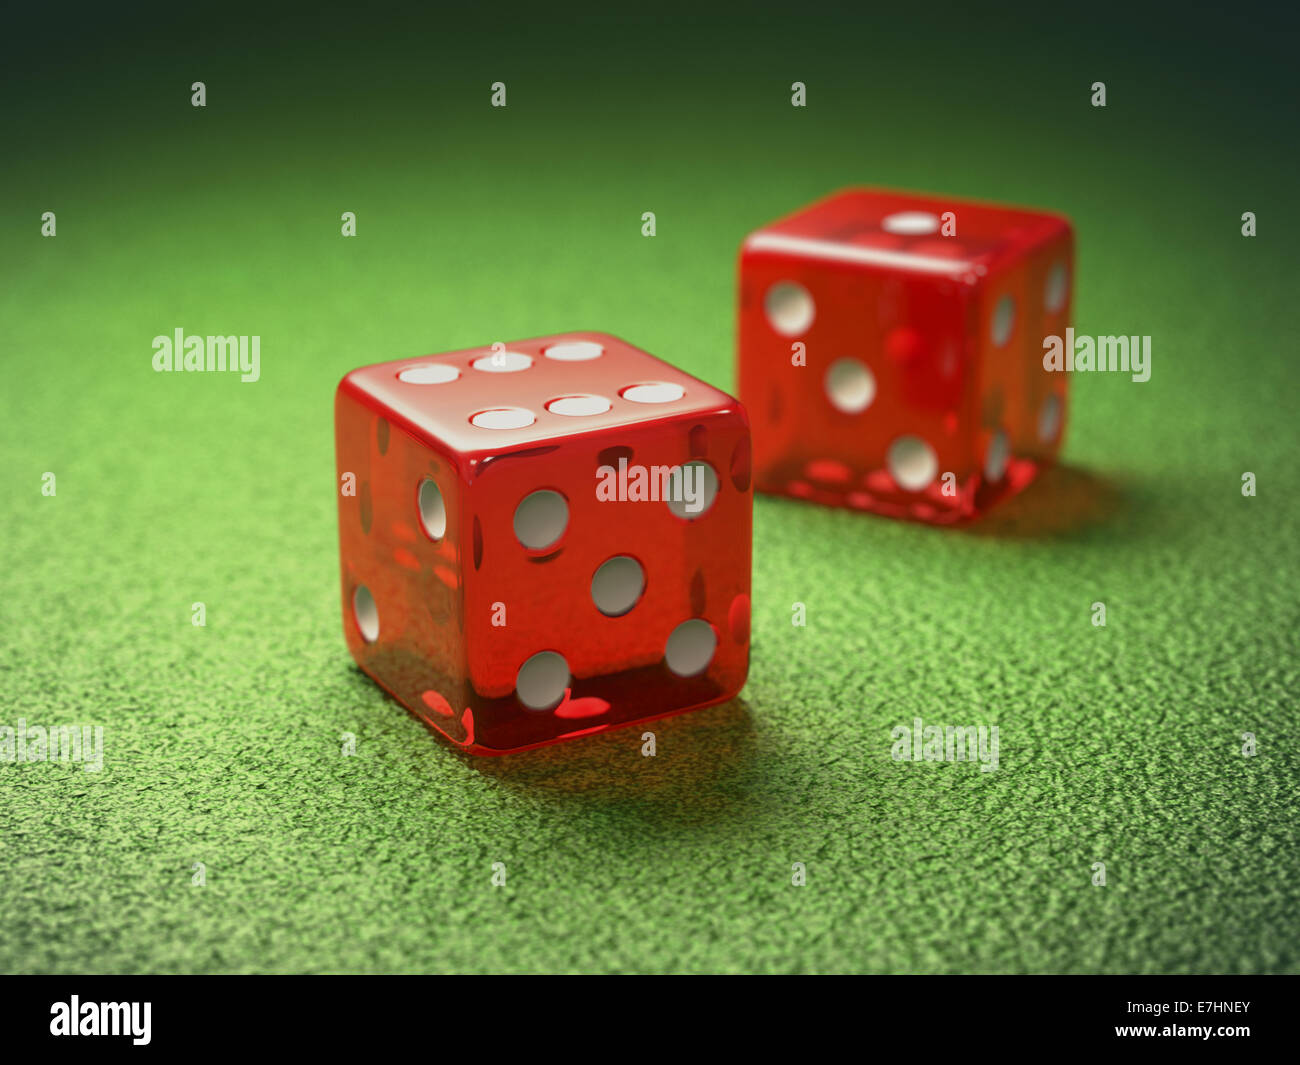 Red dice on green table gambling. Clipping path included. Stock Photo